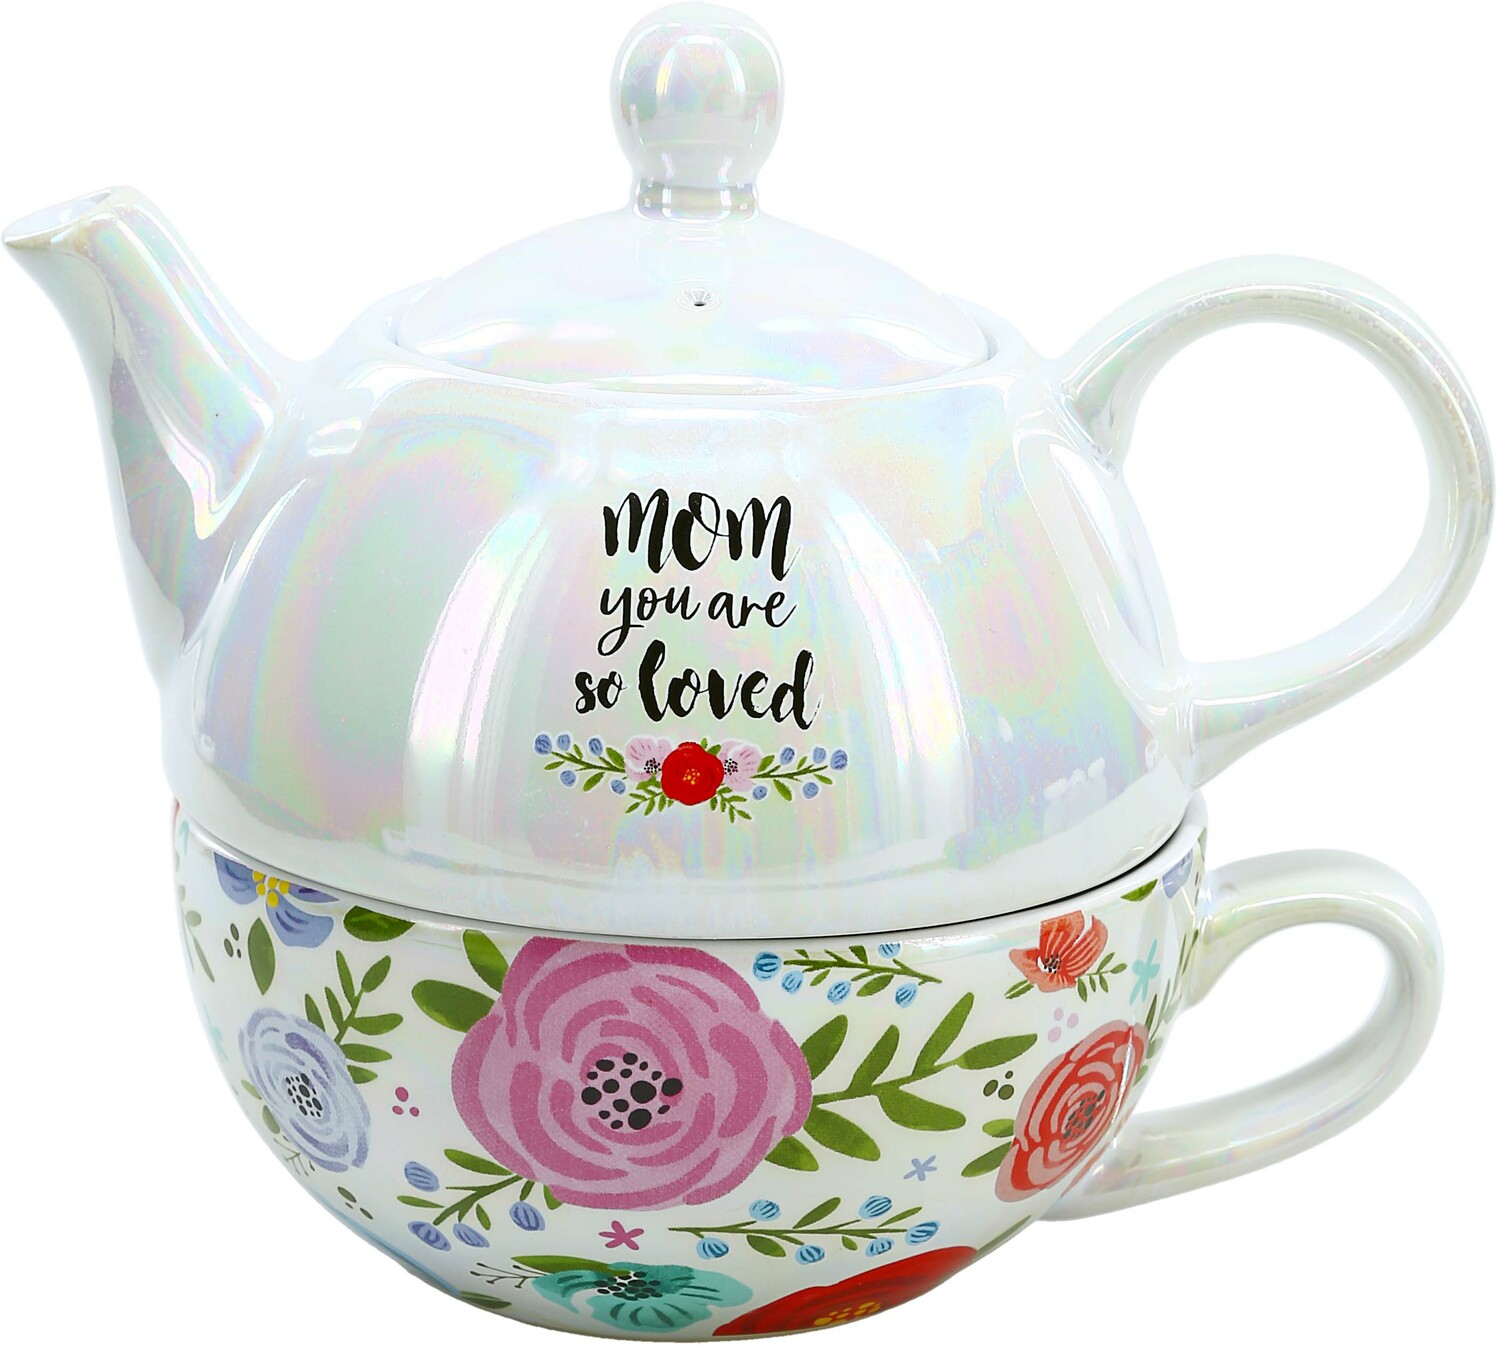 Mom by Bunches of Love - Mom - Tea for One
(14.5 oz Teapot & 10 oz Cup)